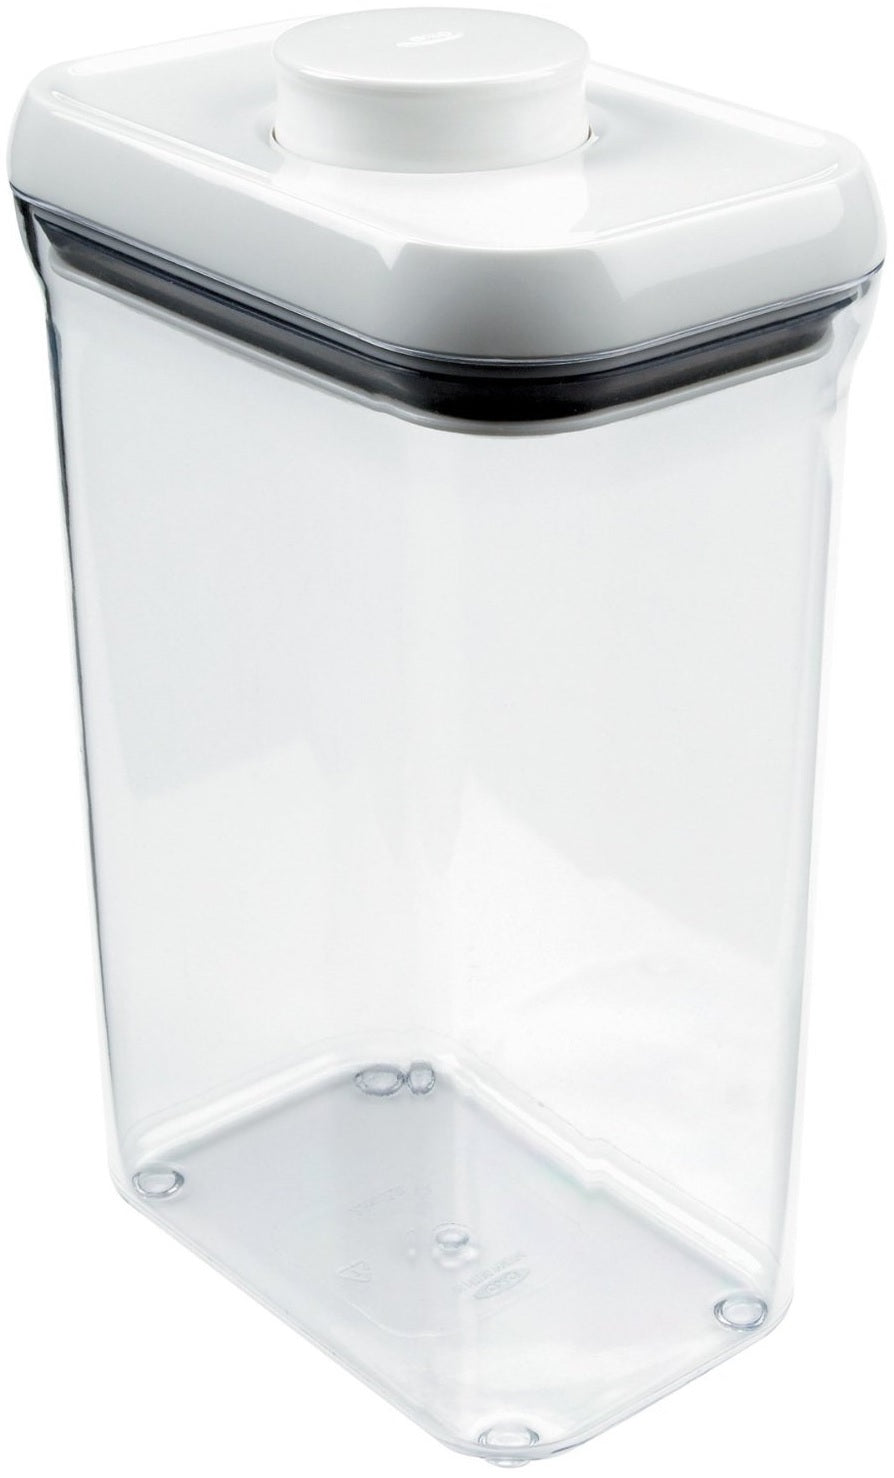 buy food containers at cheap rate in bulk. wholesale & retail kitchen tools & supplies store.